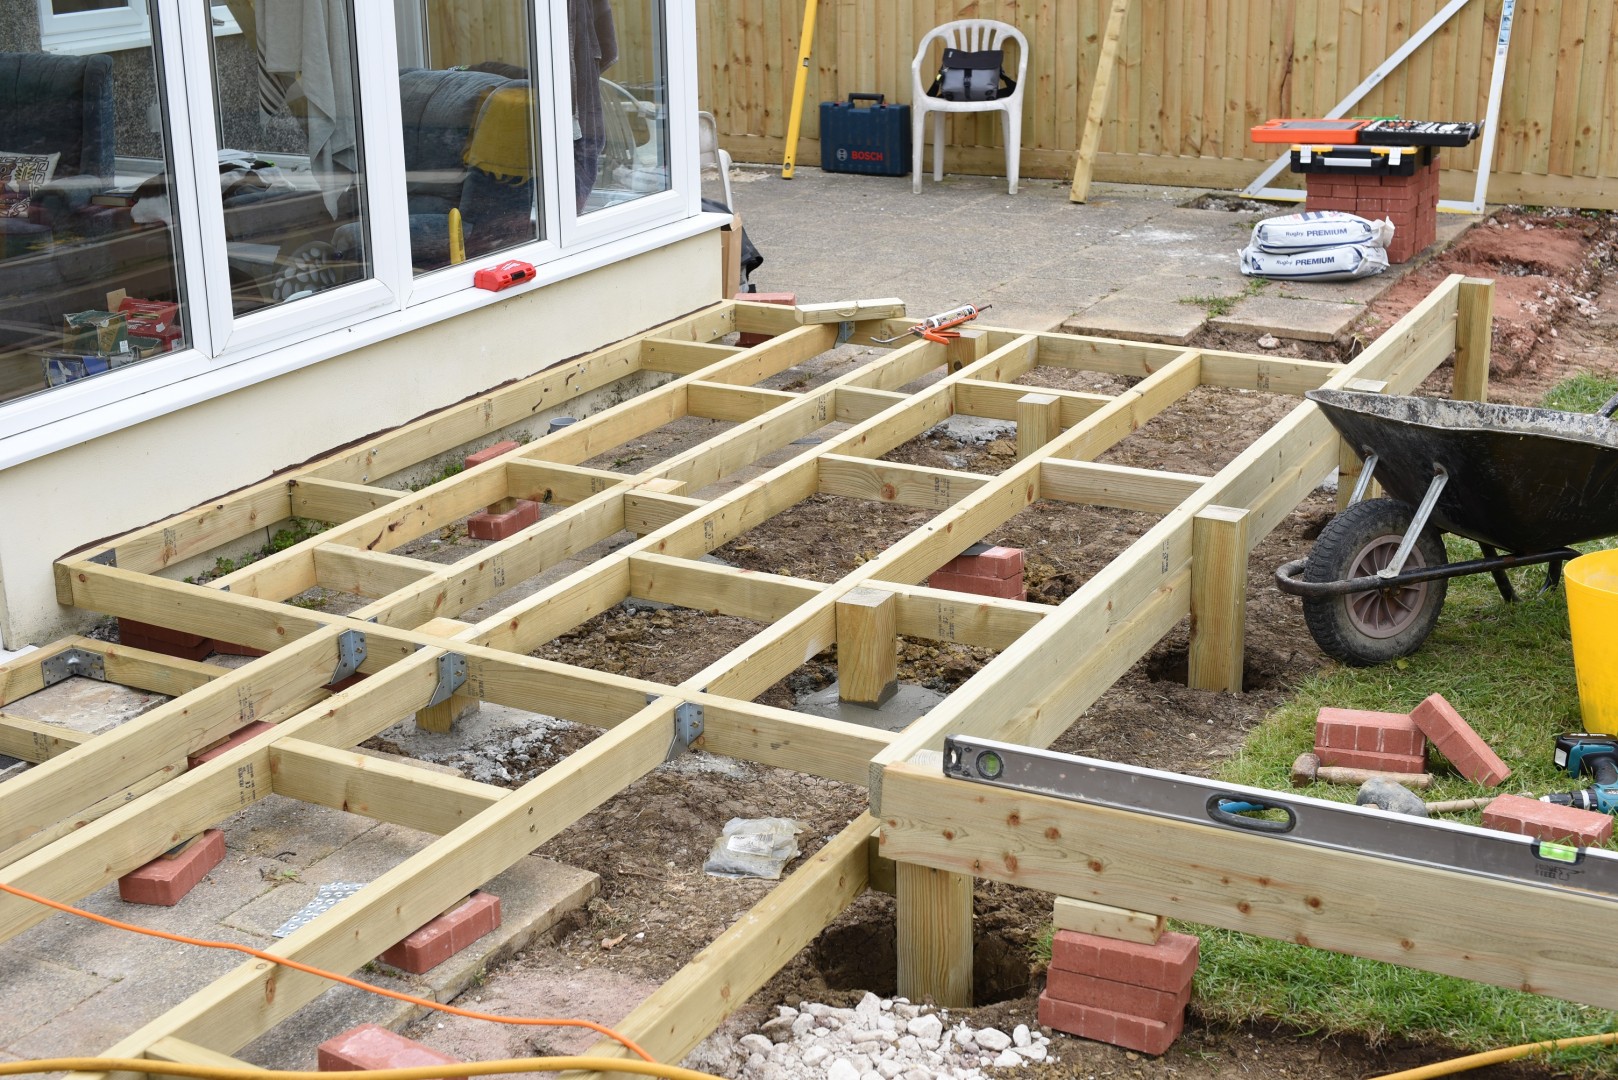 Timber decking specialists in Weymouth, timber decking, Weymouth, garden decking, wooden decking, wooden deck, feature planting